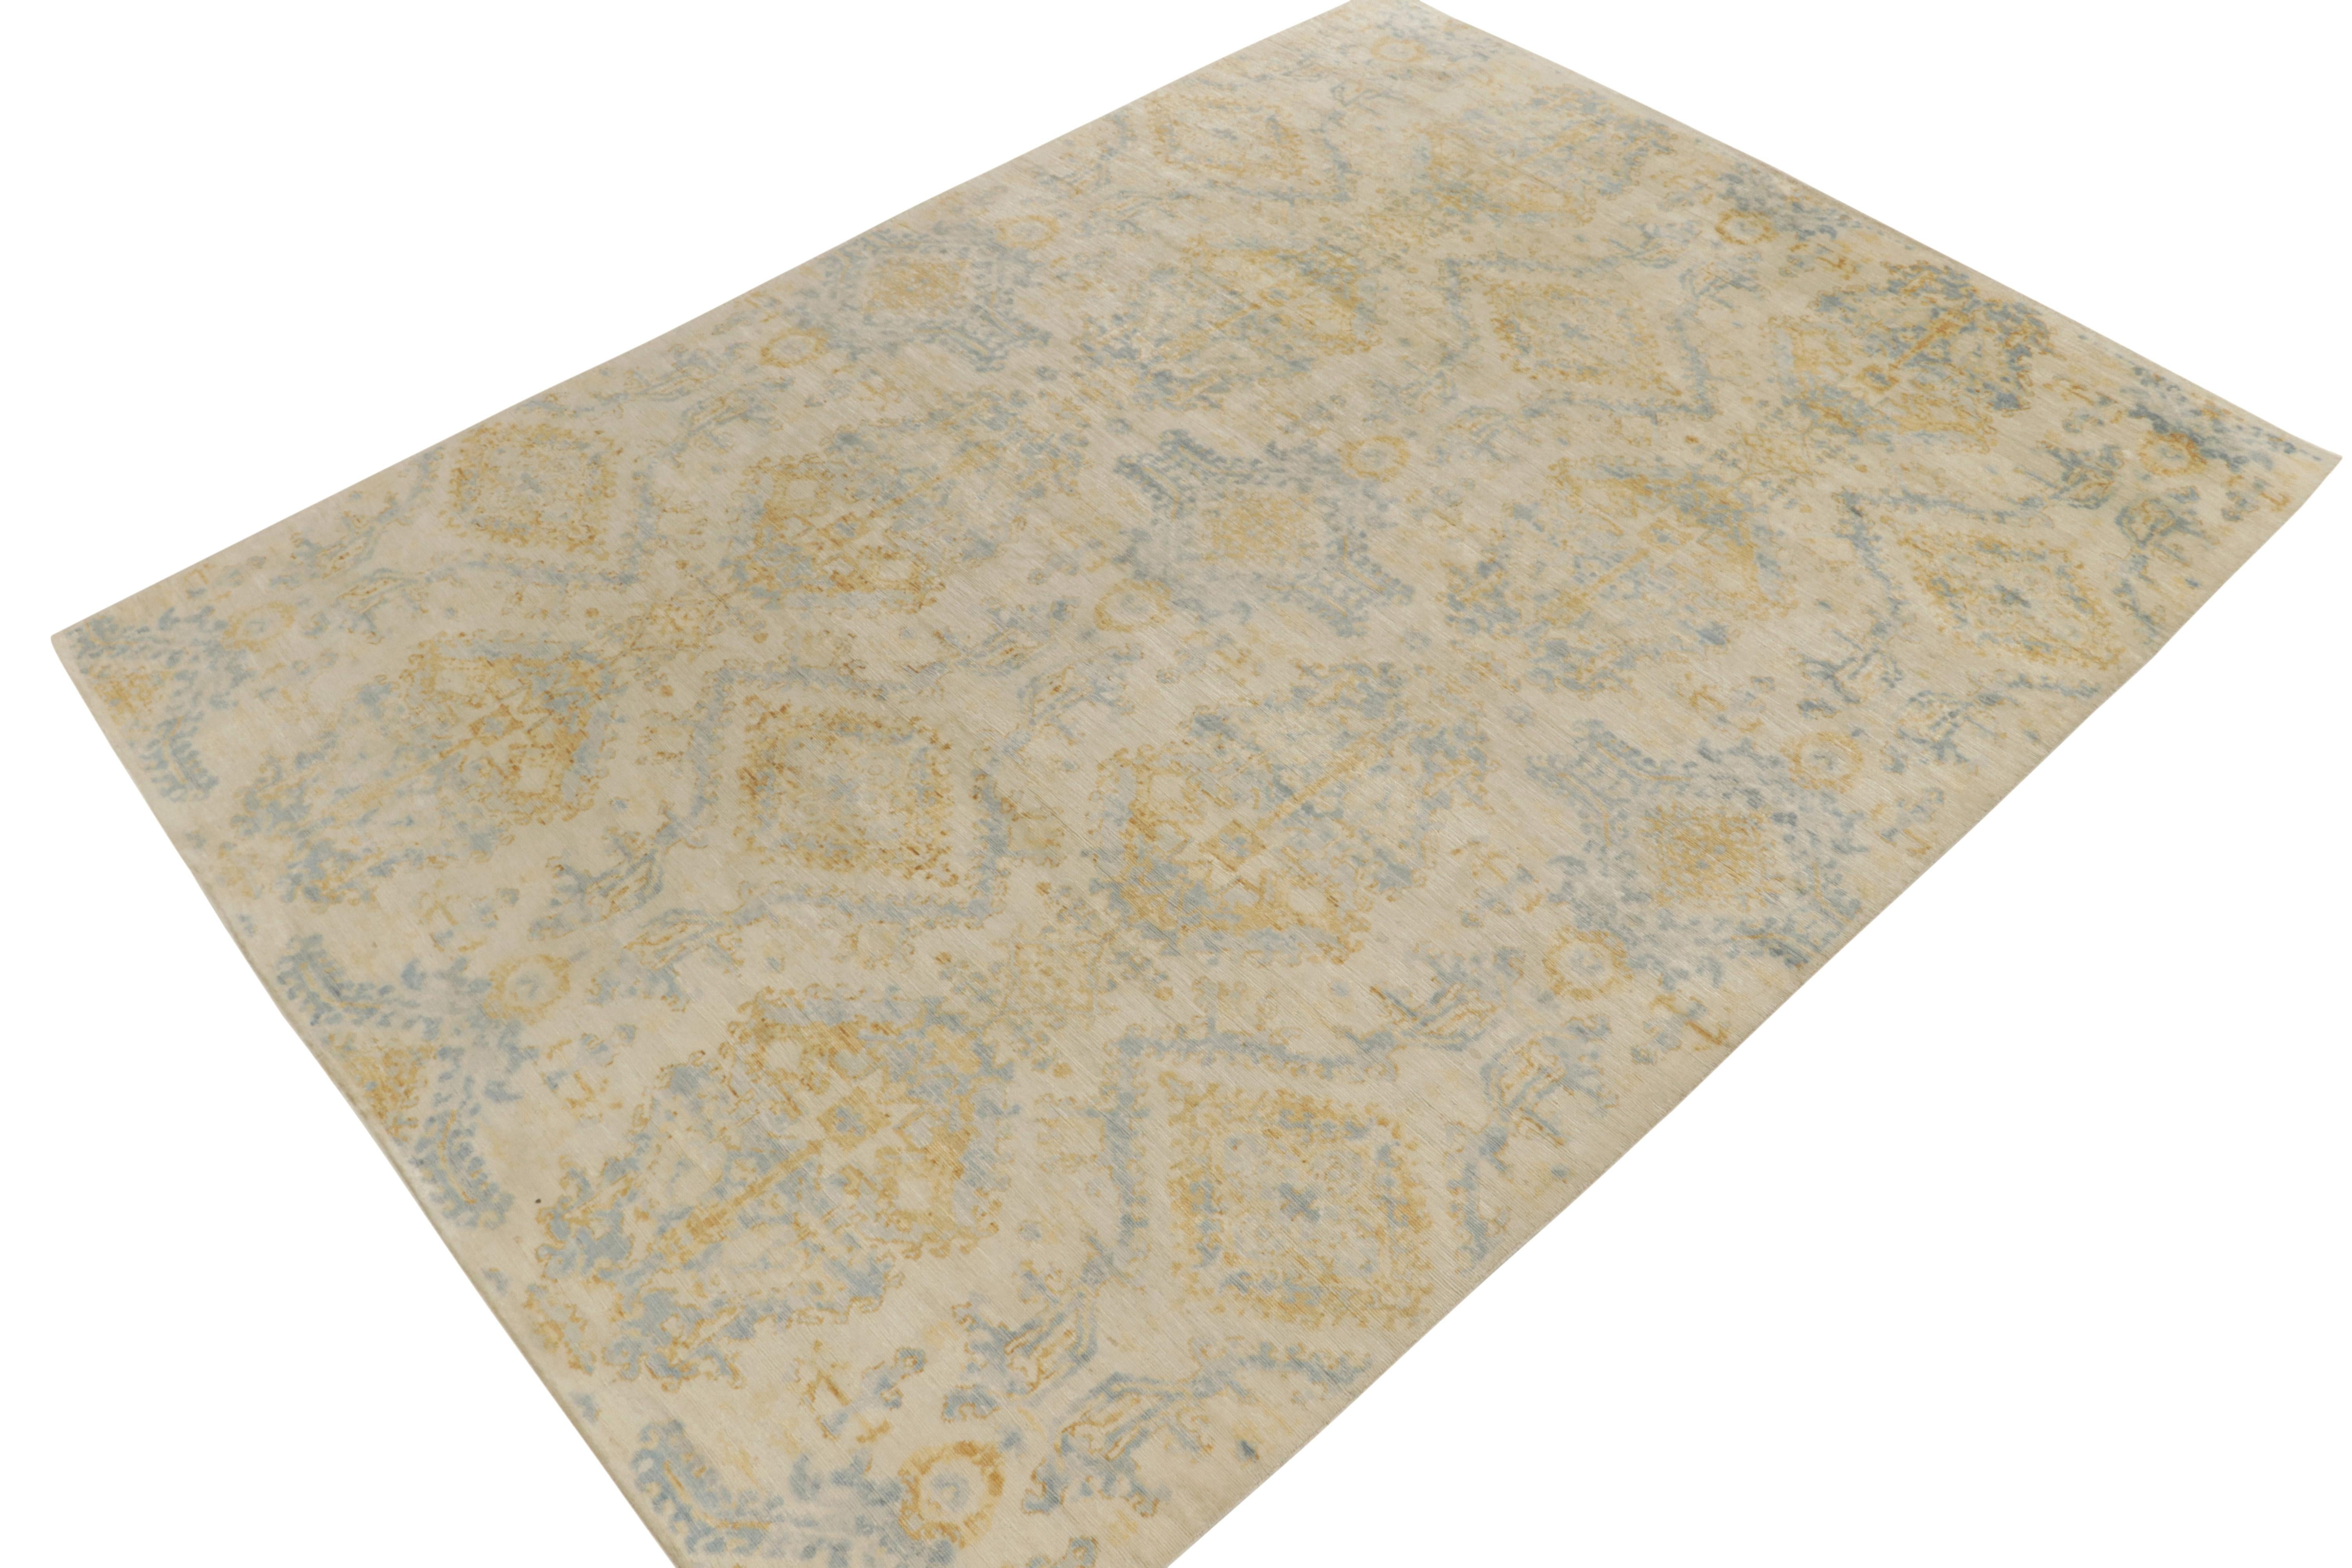 Hand-knotted in Fine silk, a 9x12 modern rug from Rug & Kilim’s bold contemporary selections.

The alluring drawing beautifully employs subtle inspirations from transitional designs in star motifs and an array of abstracted florals for a whole new